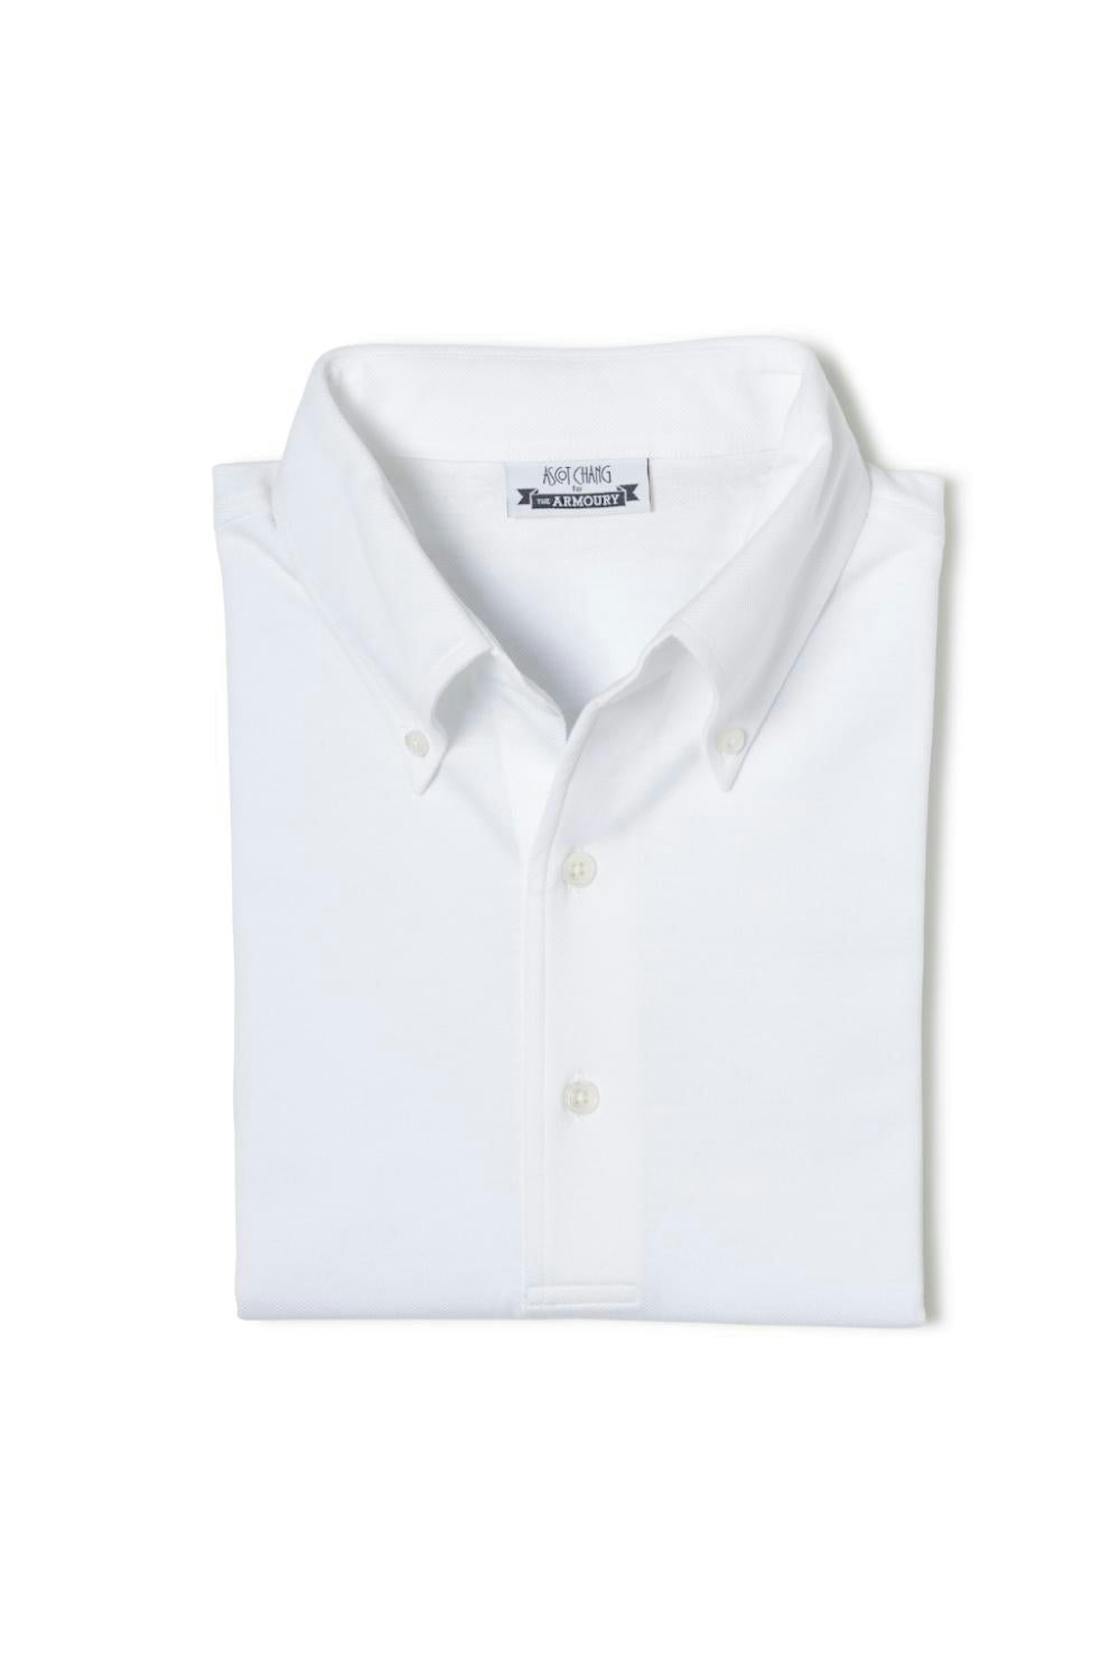 The Armoury by Ascot Chang White Short Sleeve Button Down Polo